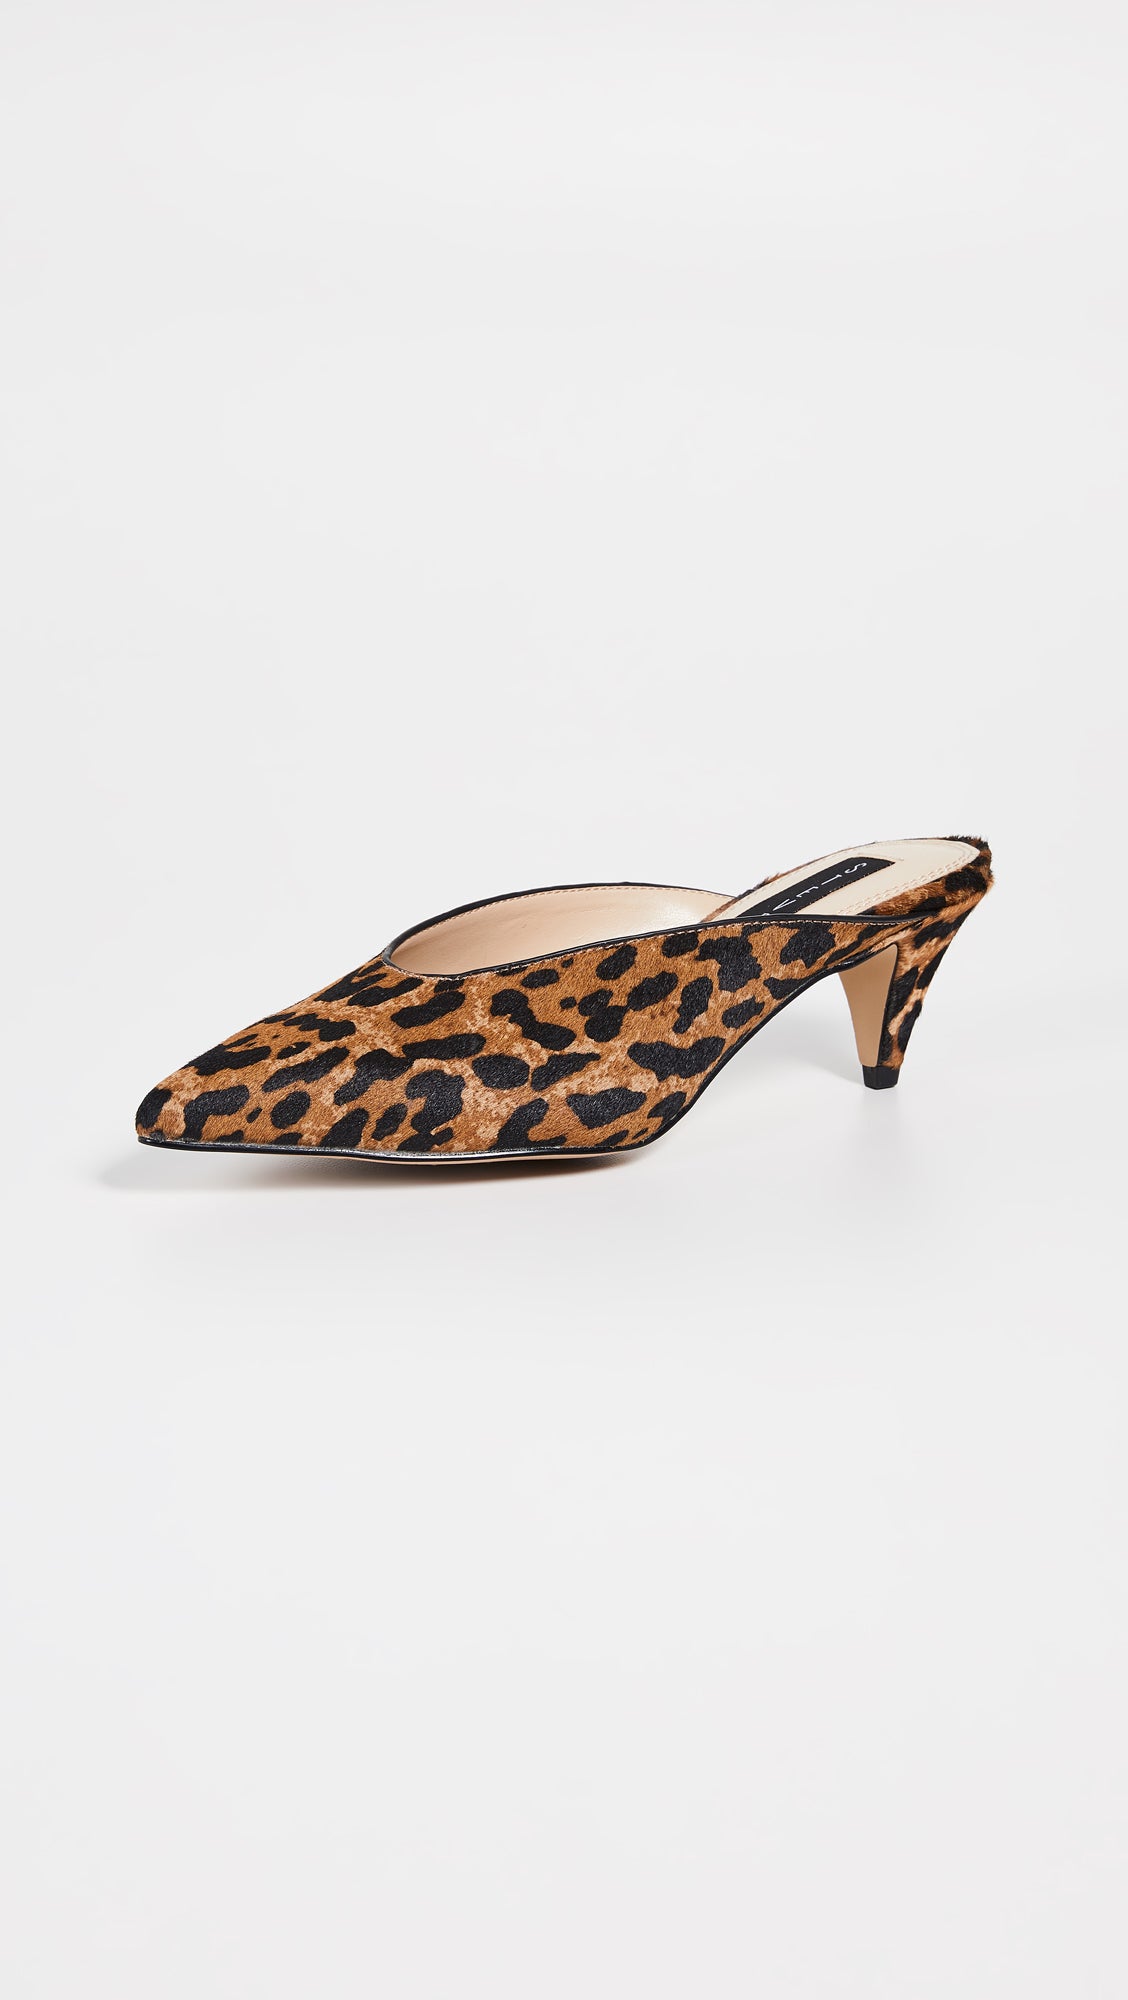 Shopbop's Designer Shoe Sale Is What We've All Been Waiting For | Essence